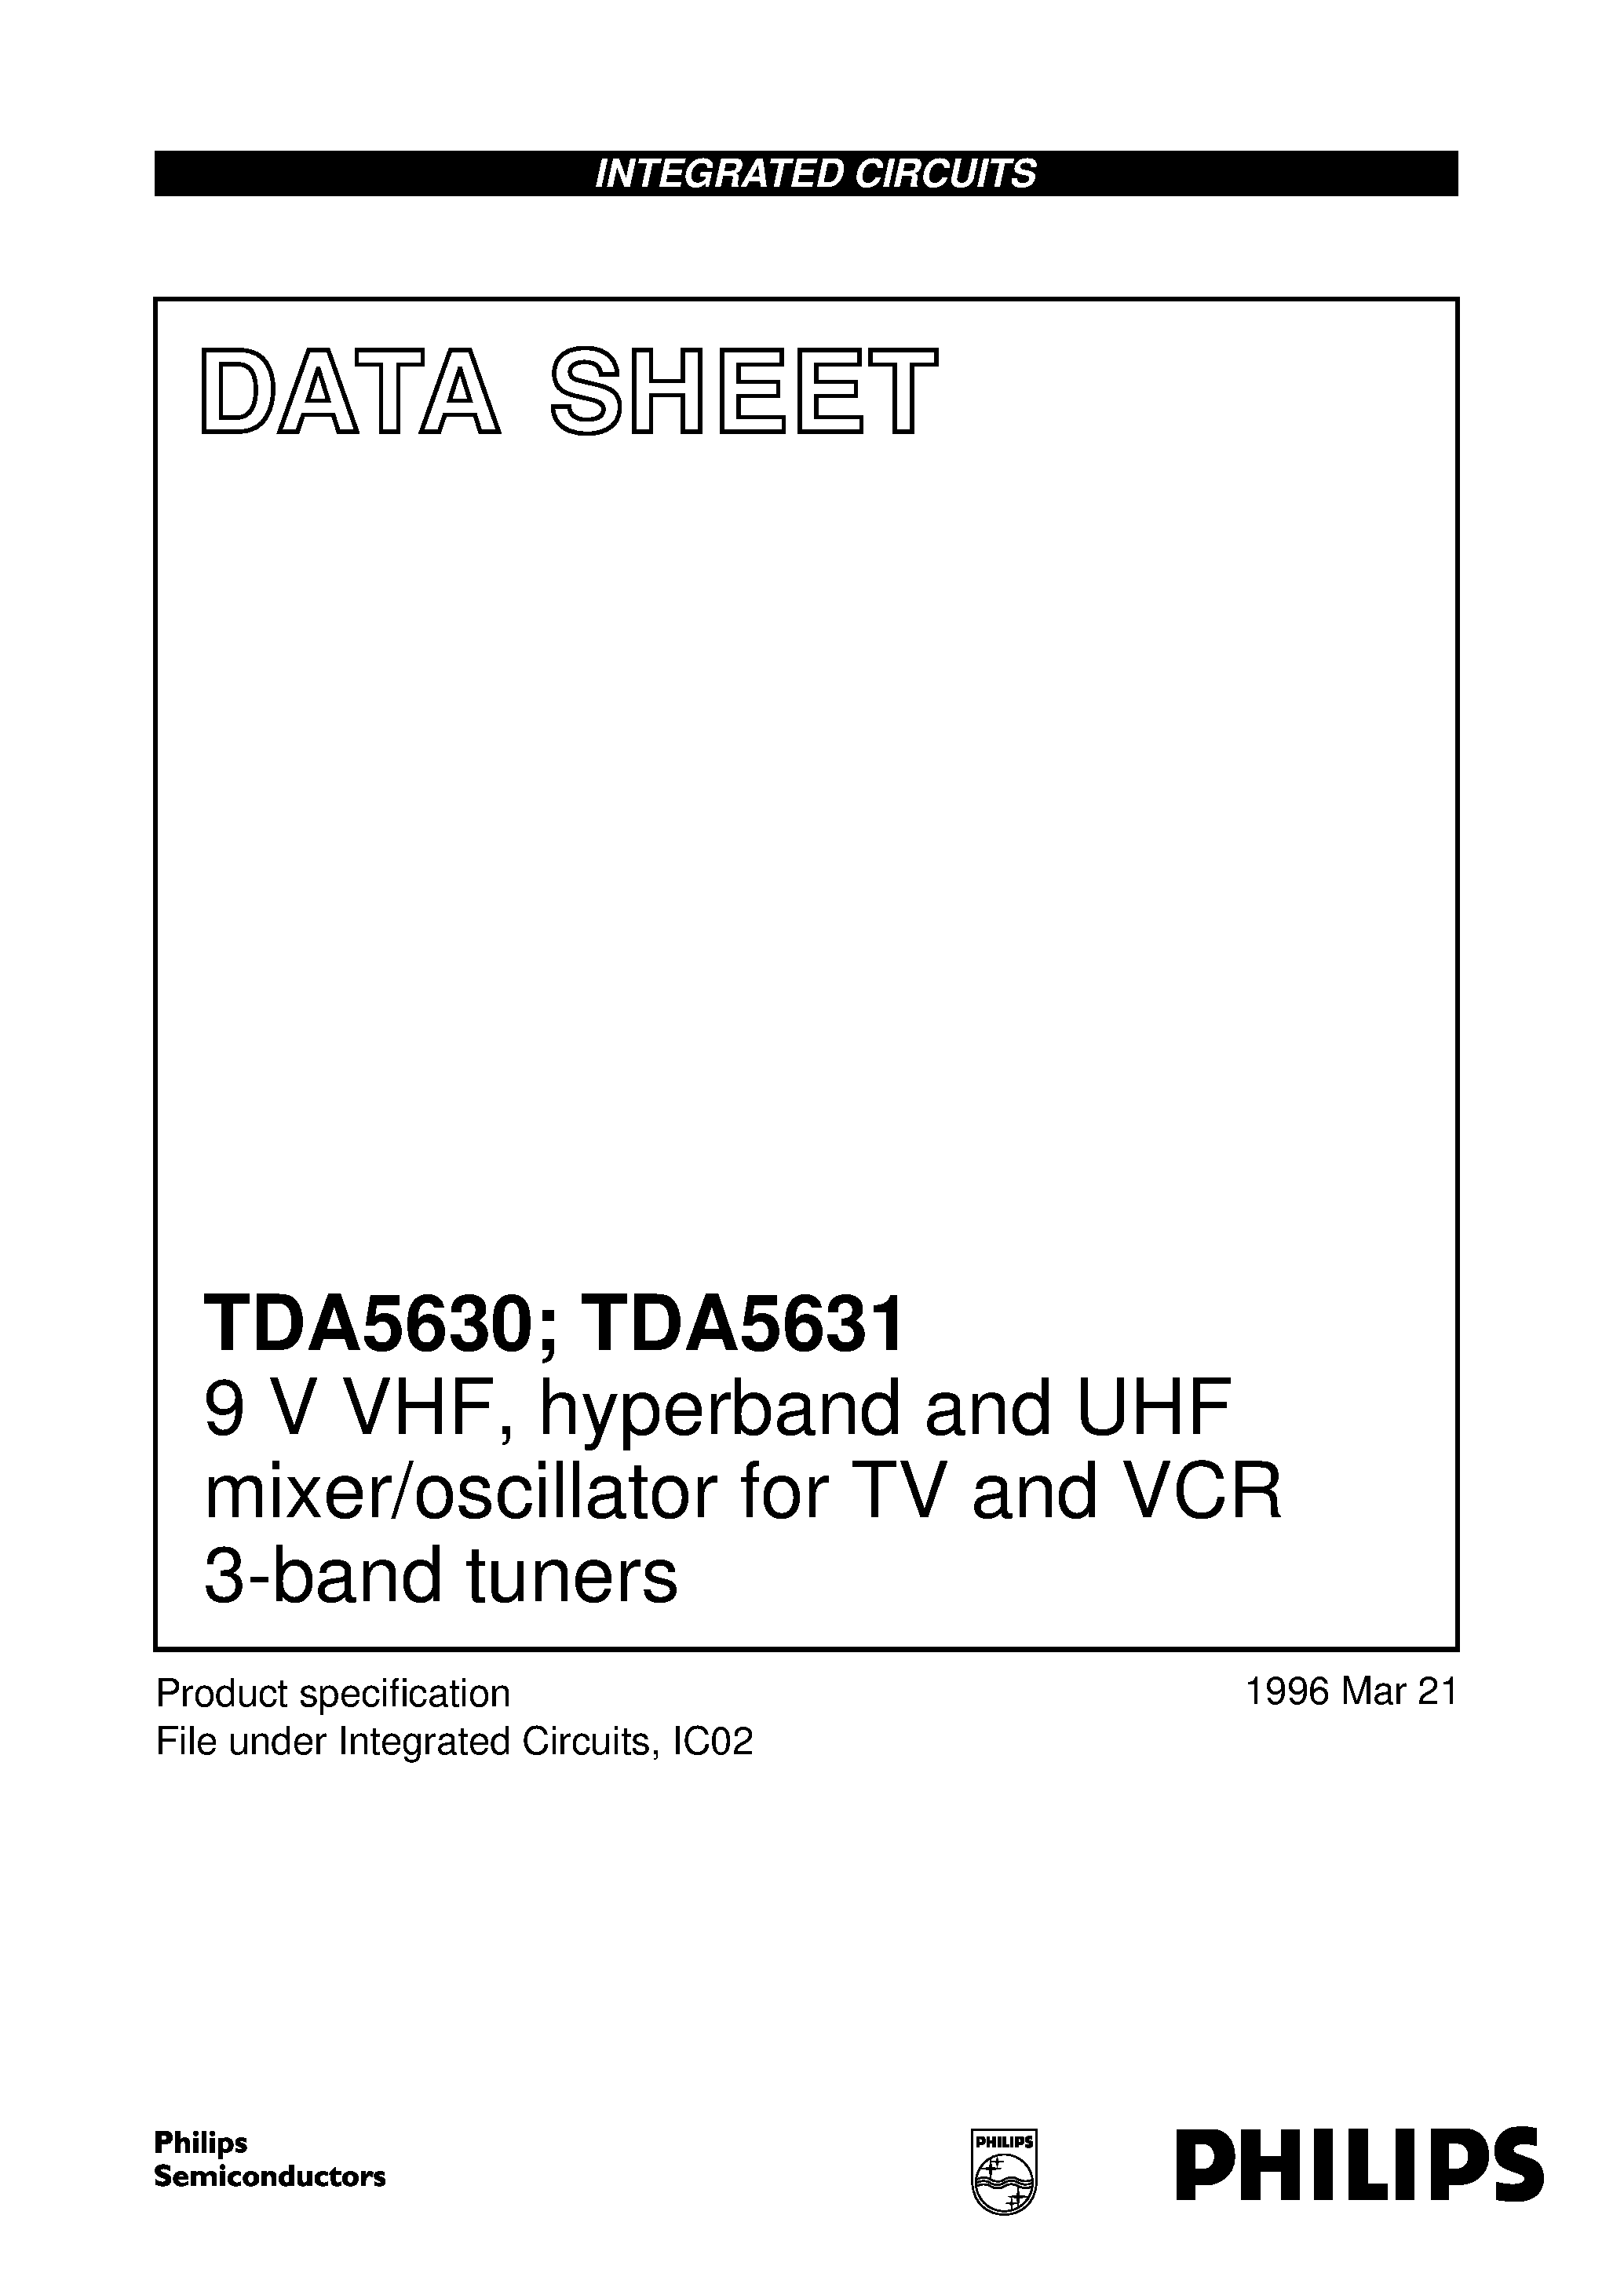 Datasheet TDA5631M - 9 V VHF/ hyperband and UHF mixer/oscillator for TV and VCR 3-band tuners page 1